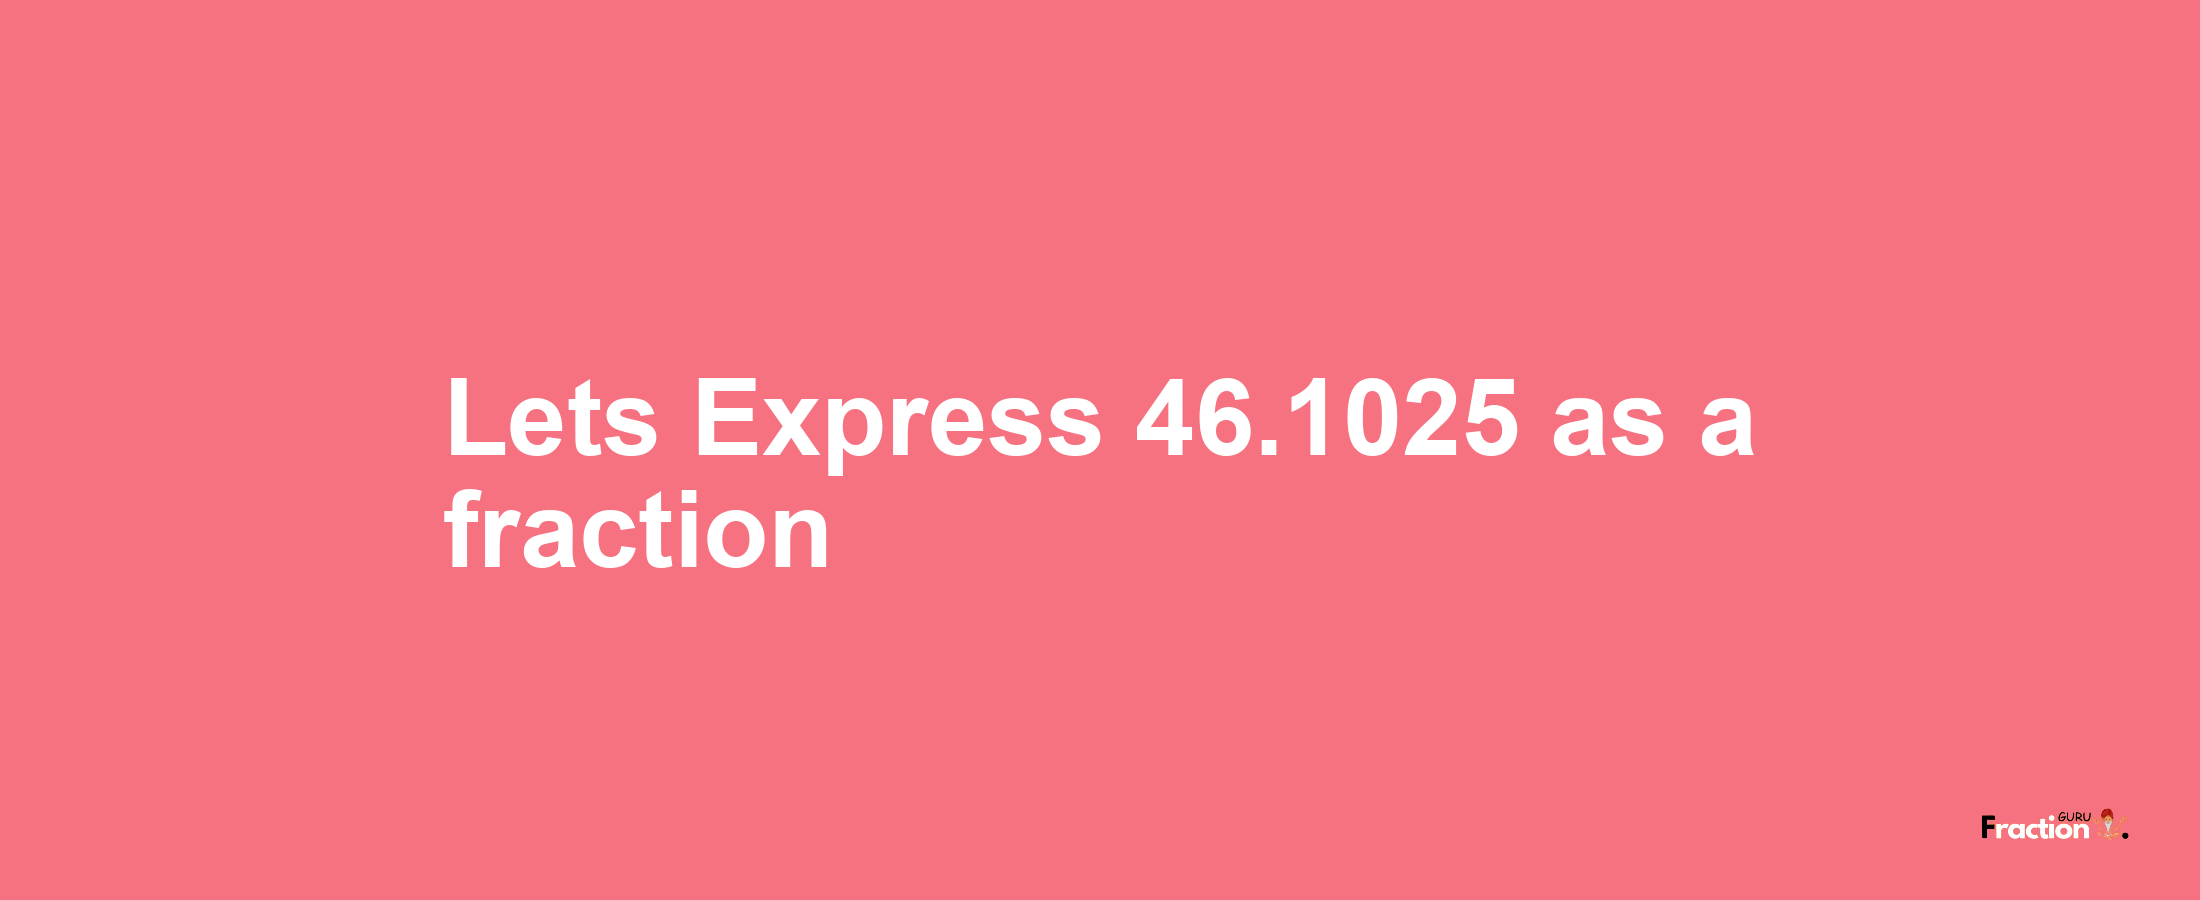 Lets Express 46.1025 as afraction